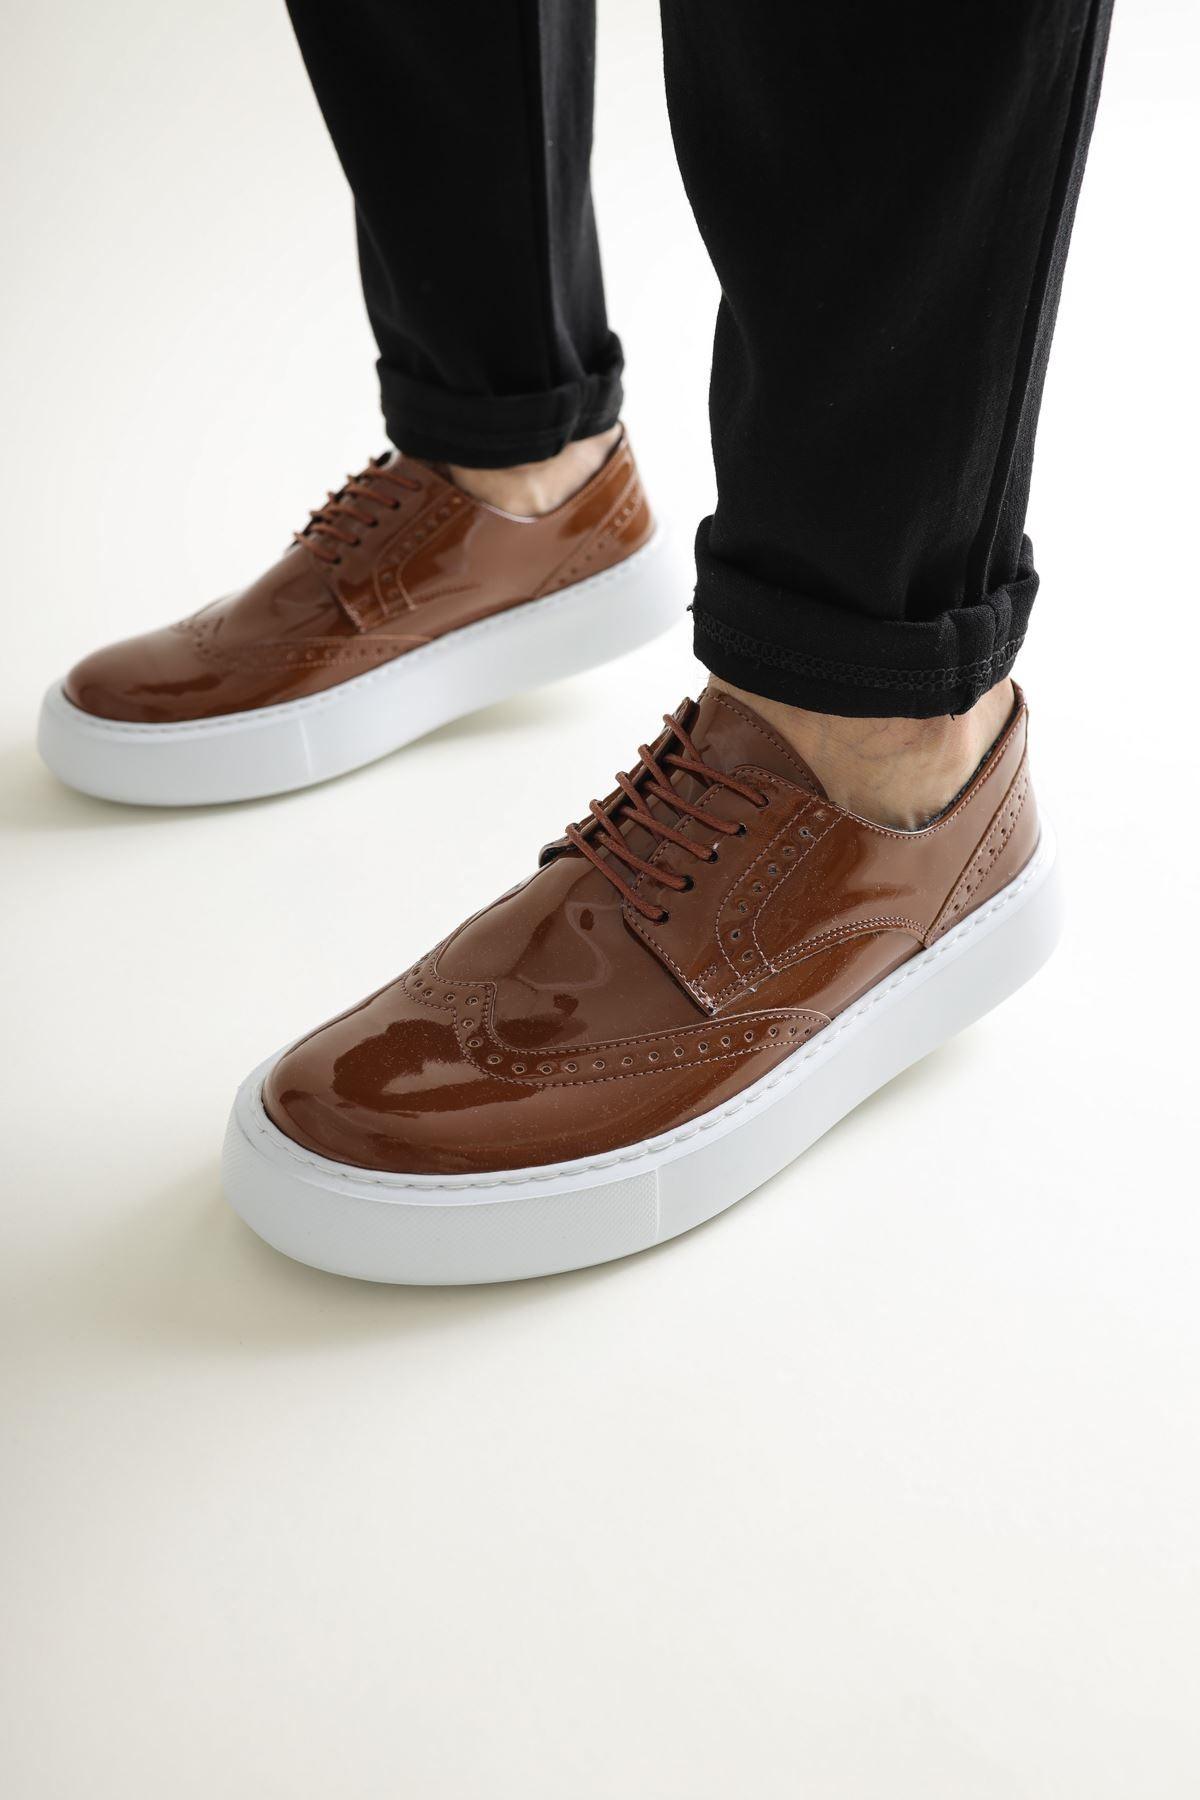 CH149 BT Patent Leather Men's Sneaker Casual Shoes - STREET MODE ™